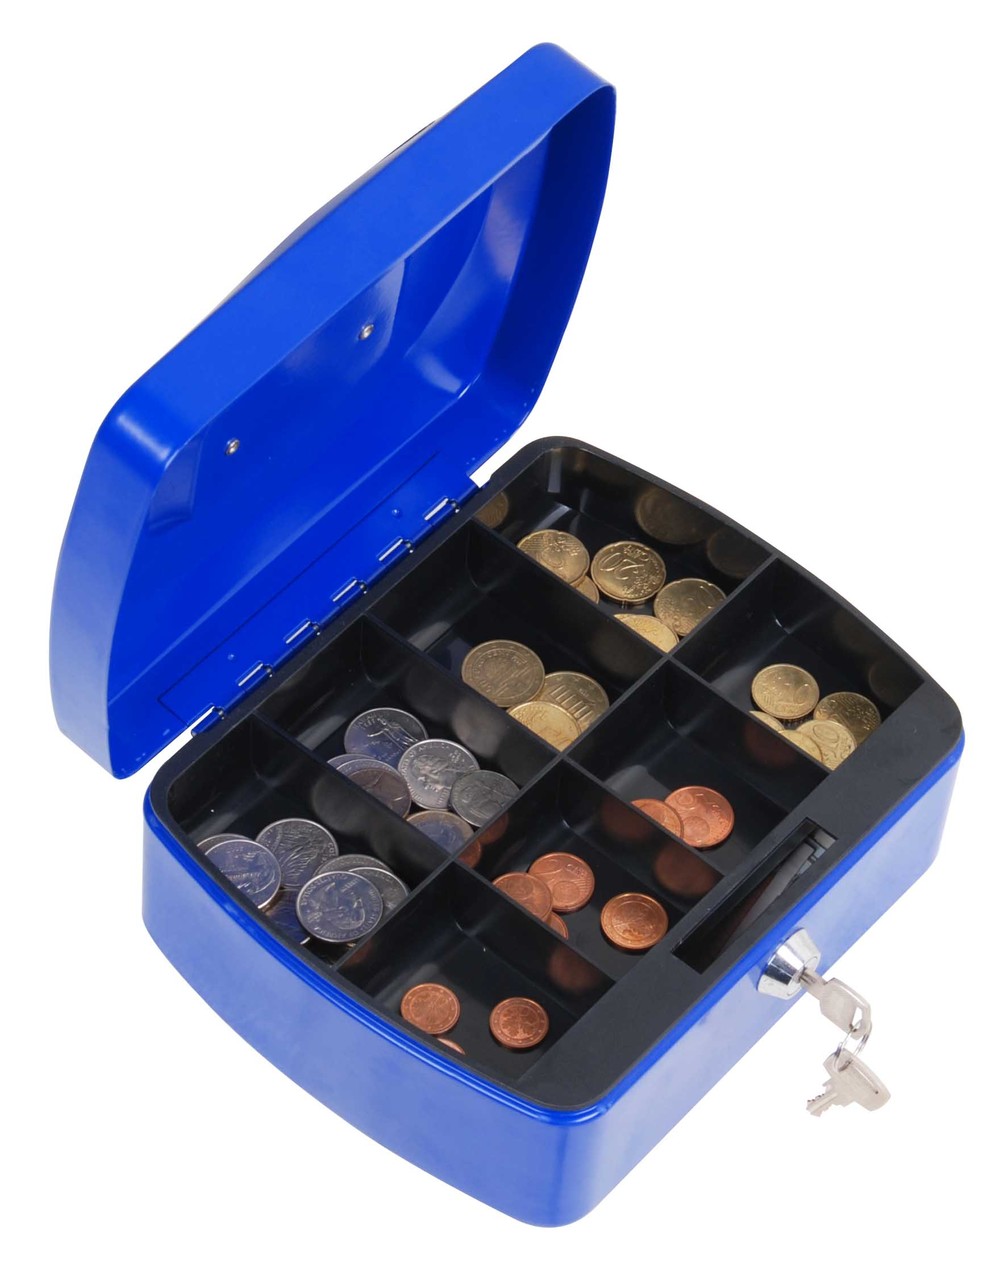 Metal Portable Cash Box With Money Tray 8 inch Money Safe Cash Box With Key Lock Cash Storage Box/